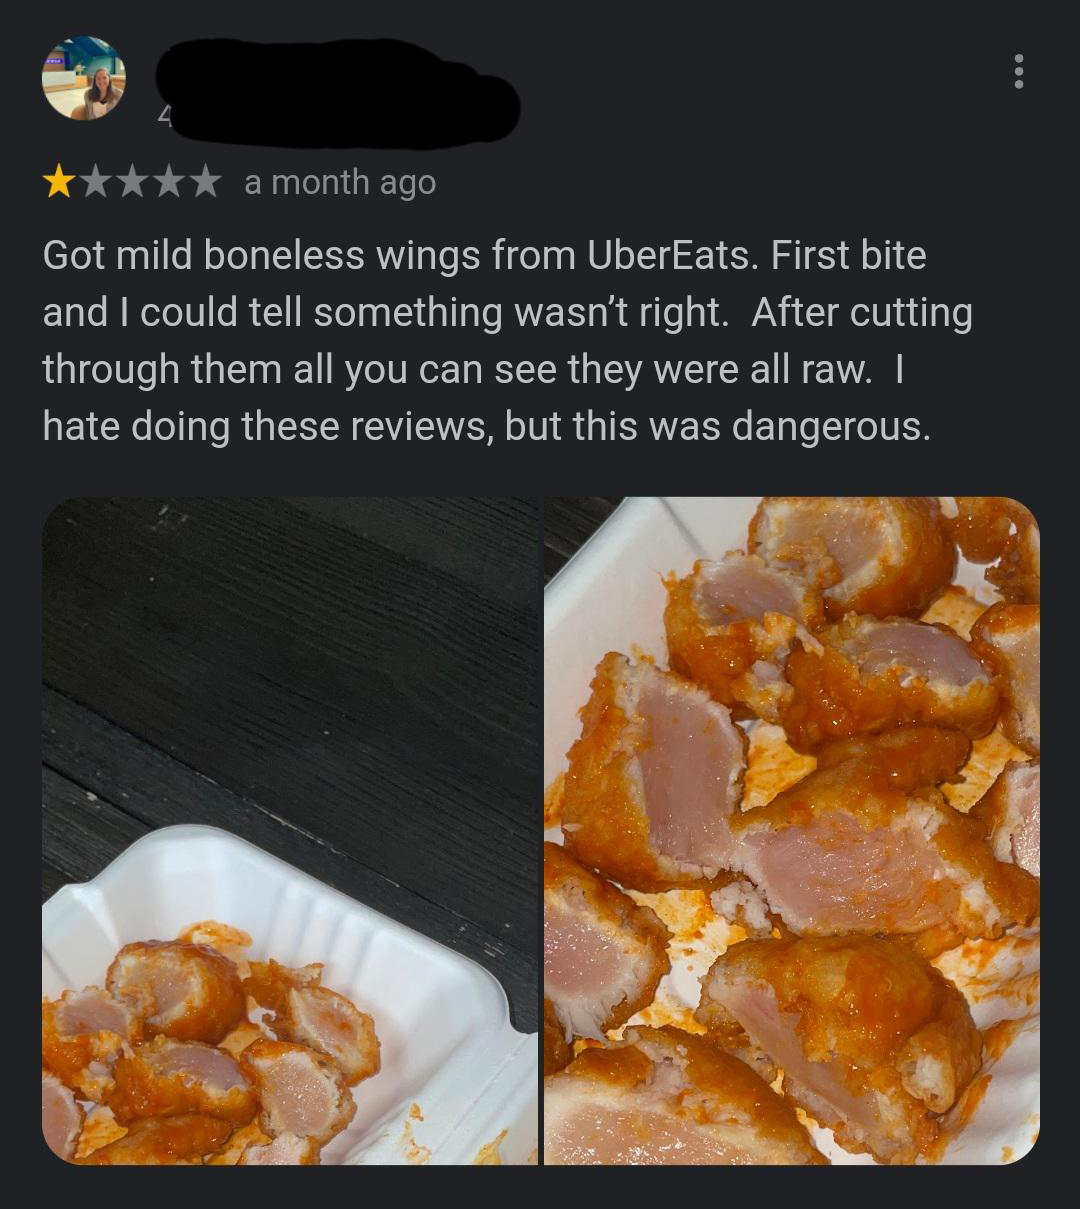 junk food - a month ago Got mild boneless wings from UberEats. First bite and I could tell something wasn't right. After cutting through them all you can see they were all raw. I hate doing these reviews, but this was dangerous.